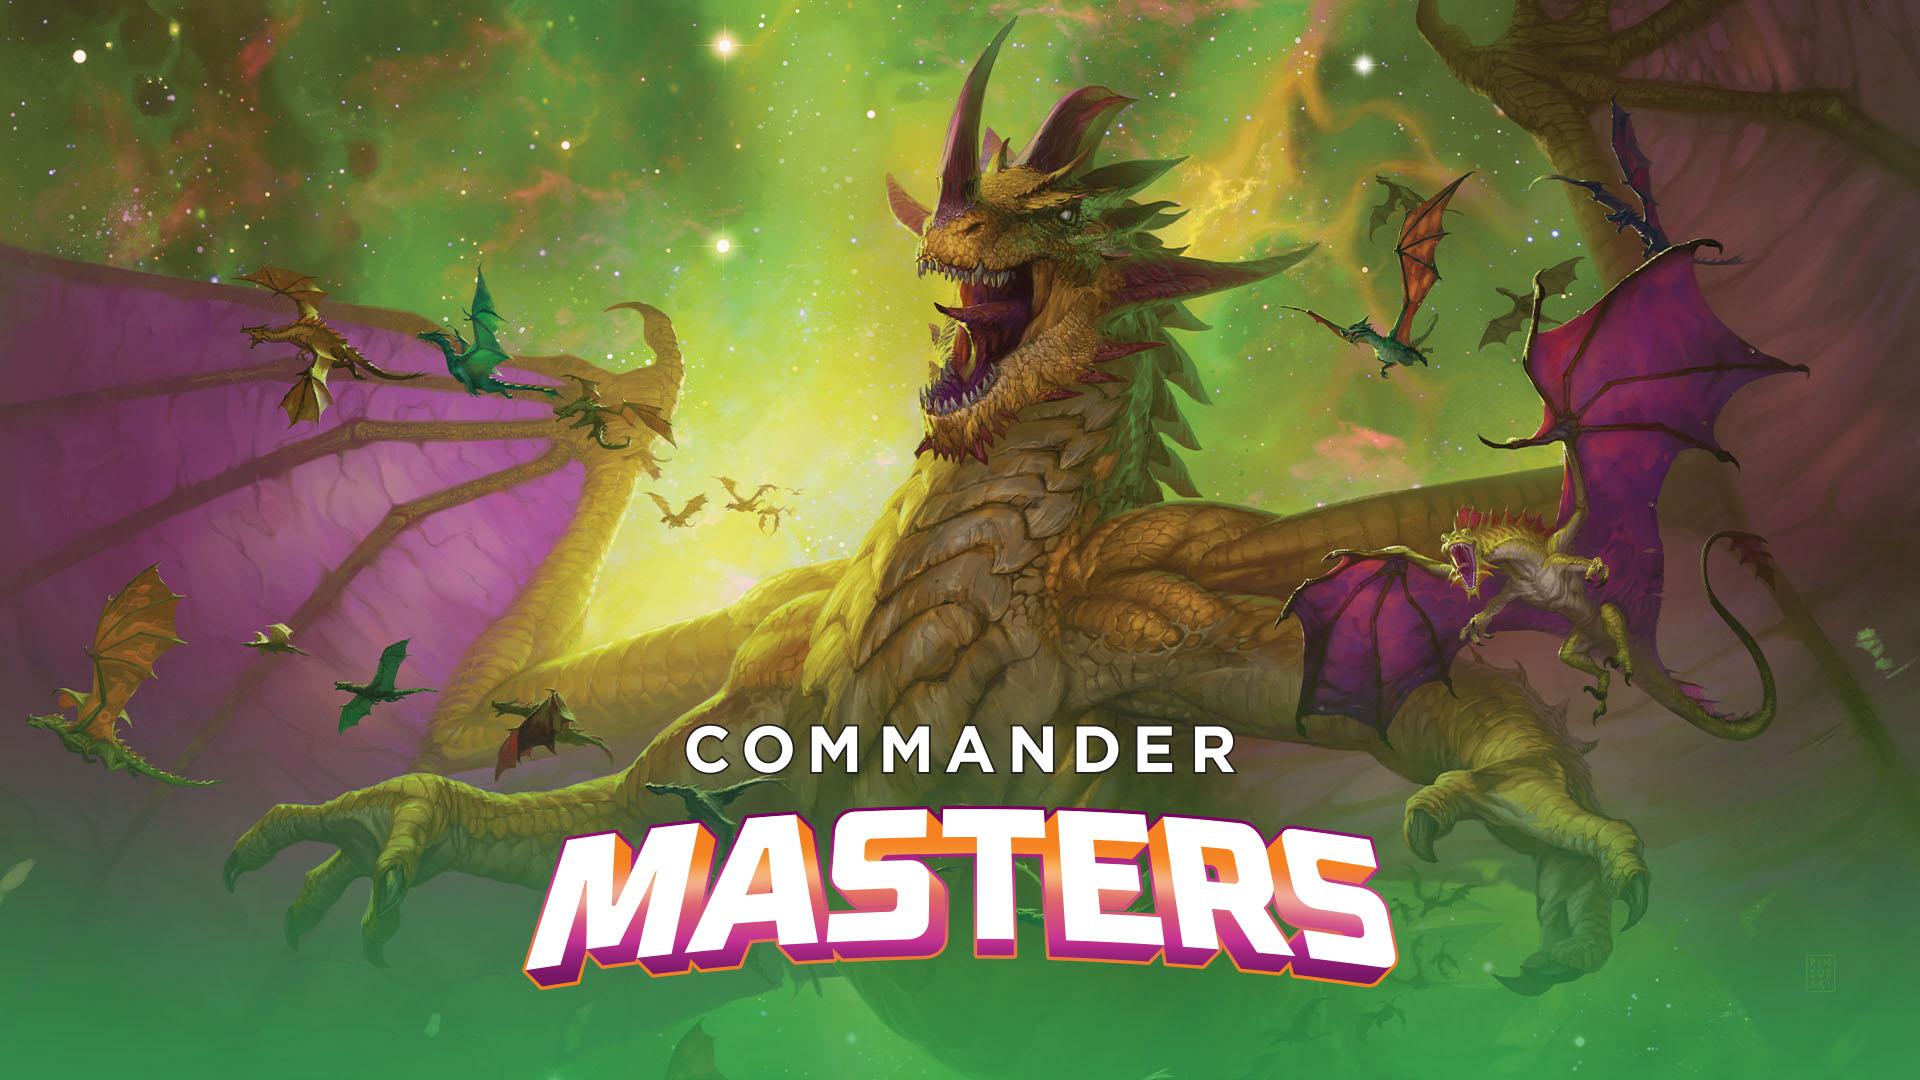 Promo art showing the Ur-Dragon from Commander Masters